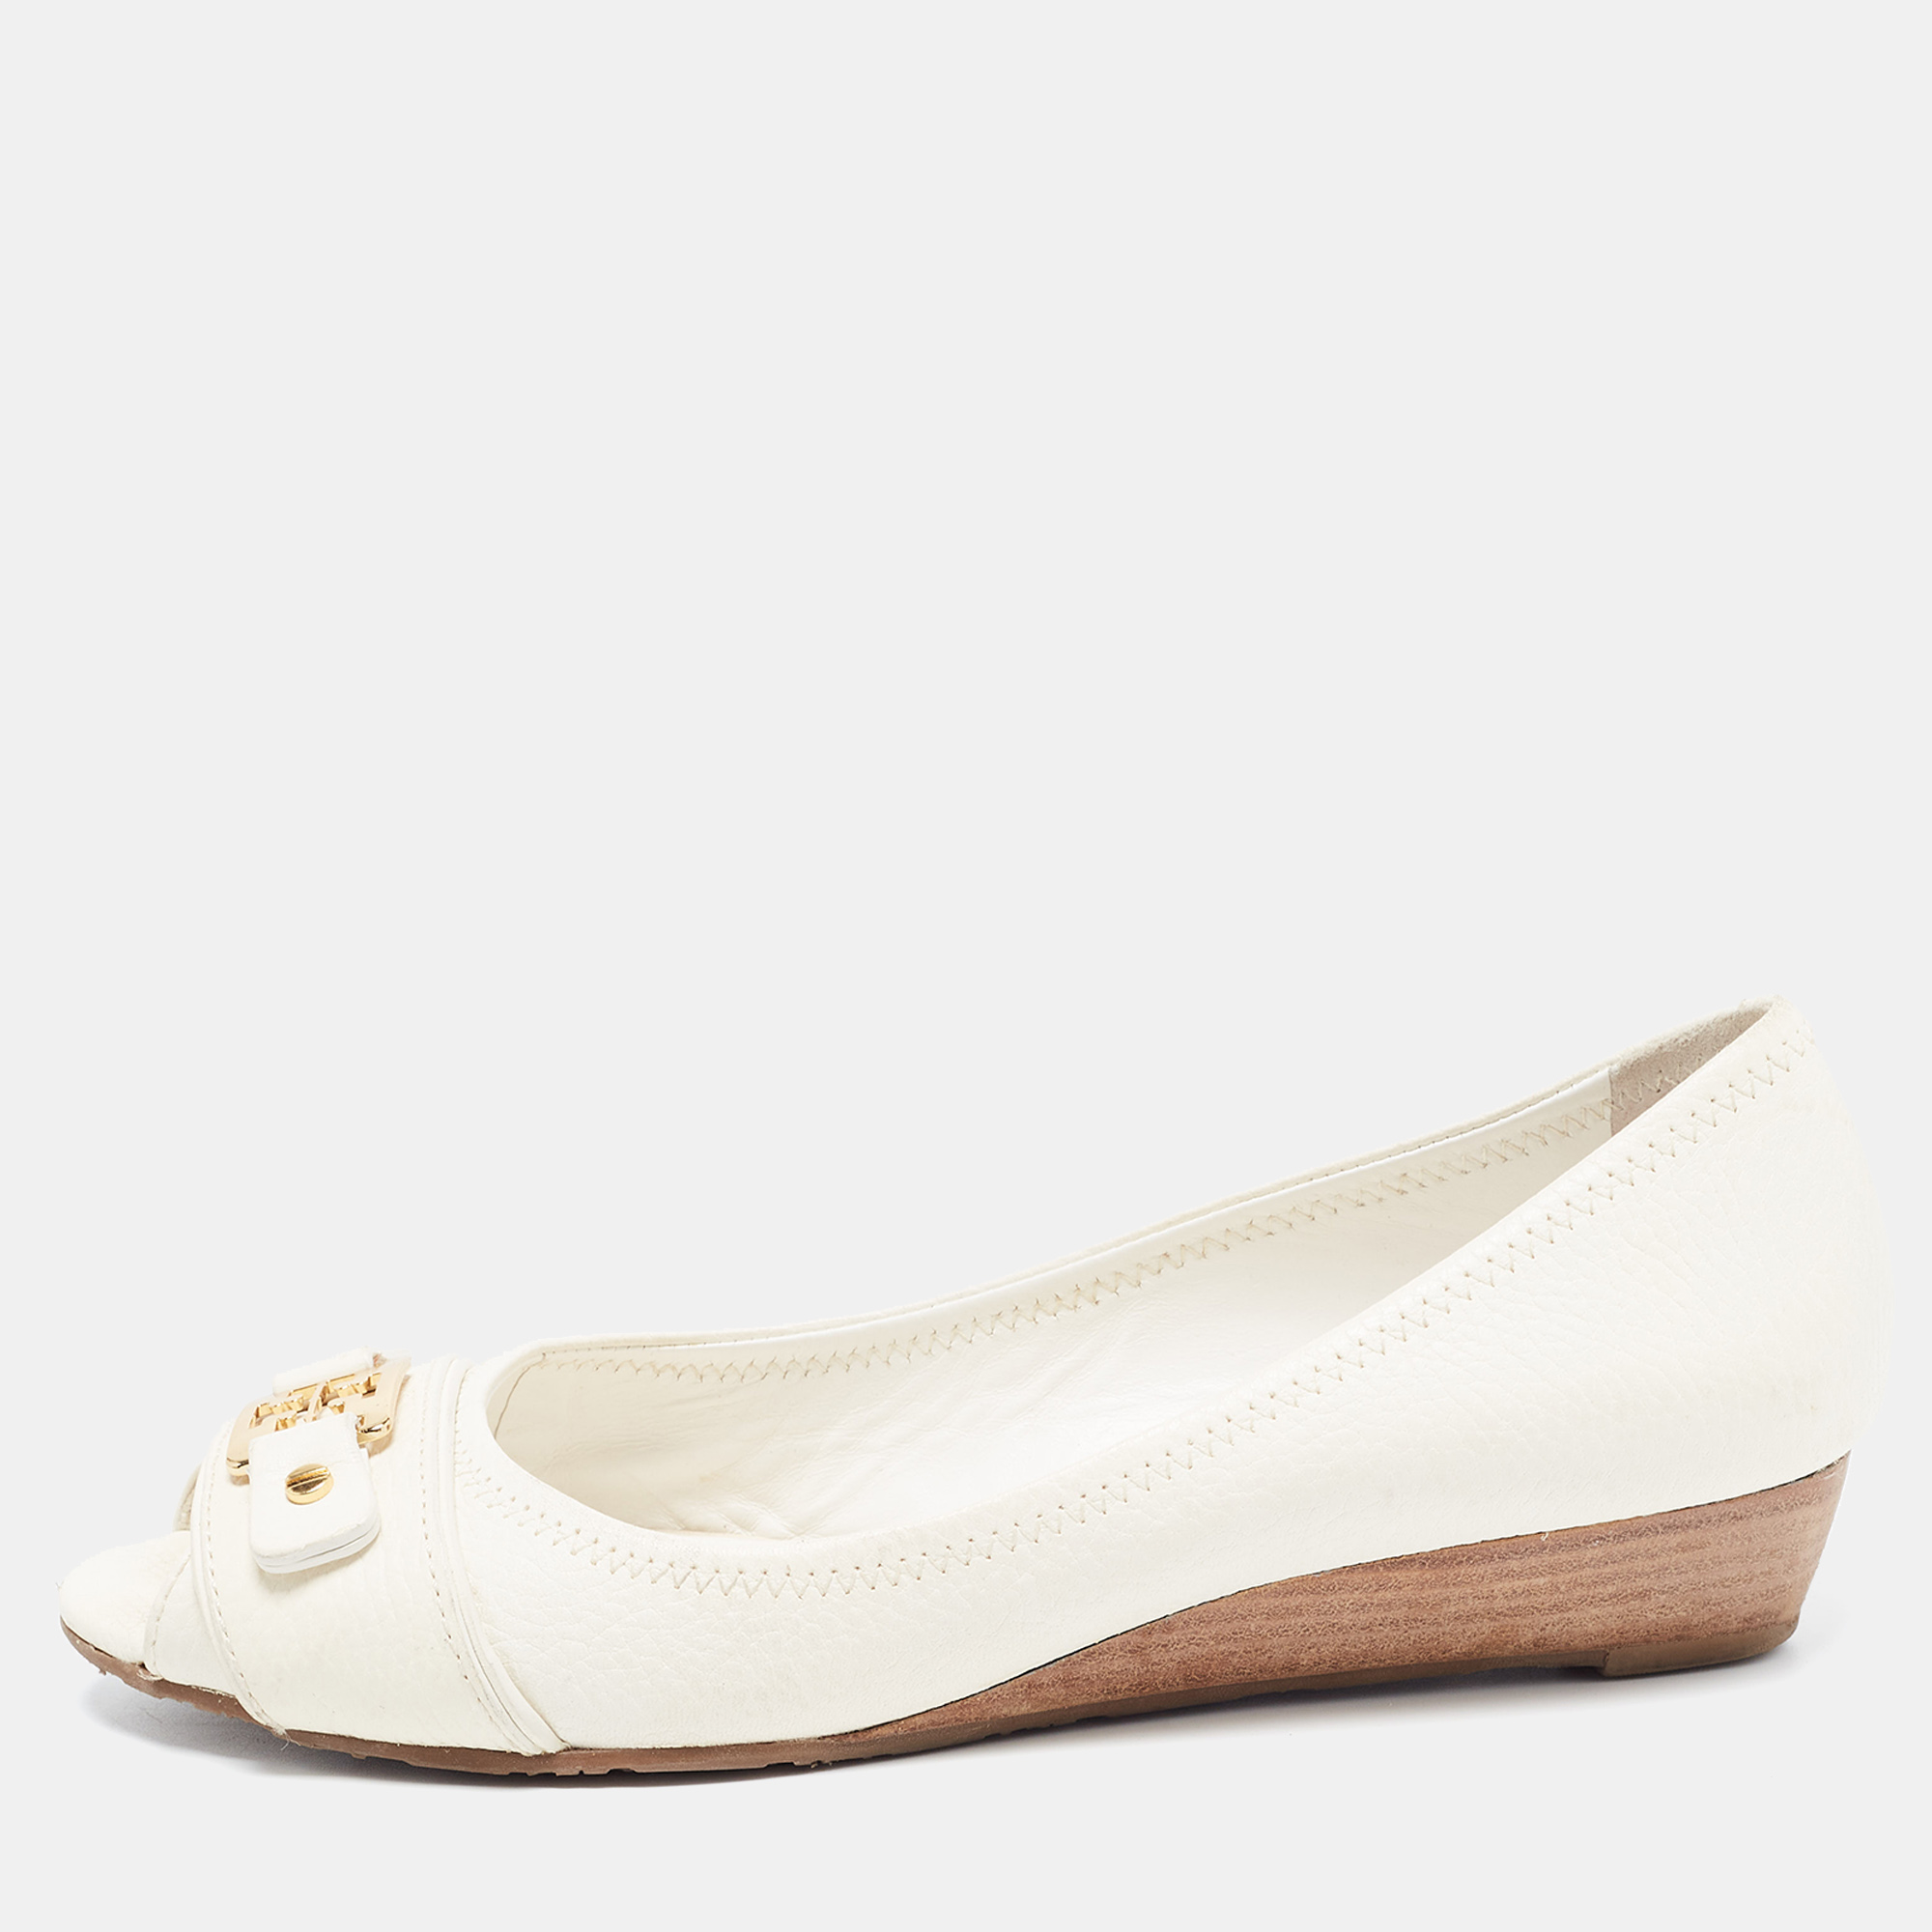 Tory Burch White Leather Logo Detail Peep Toe Wedge Pumps Size 40